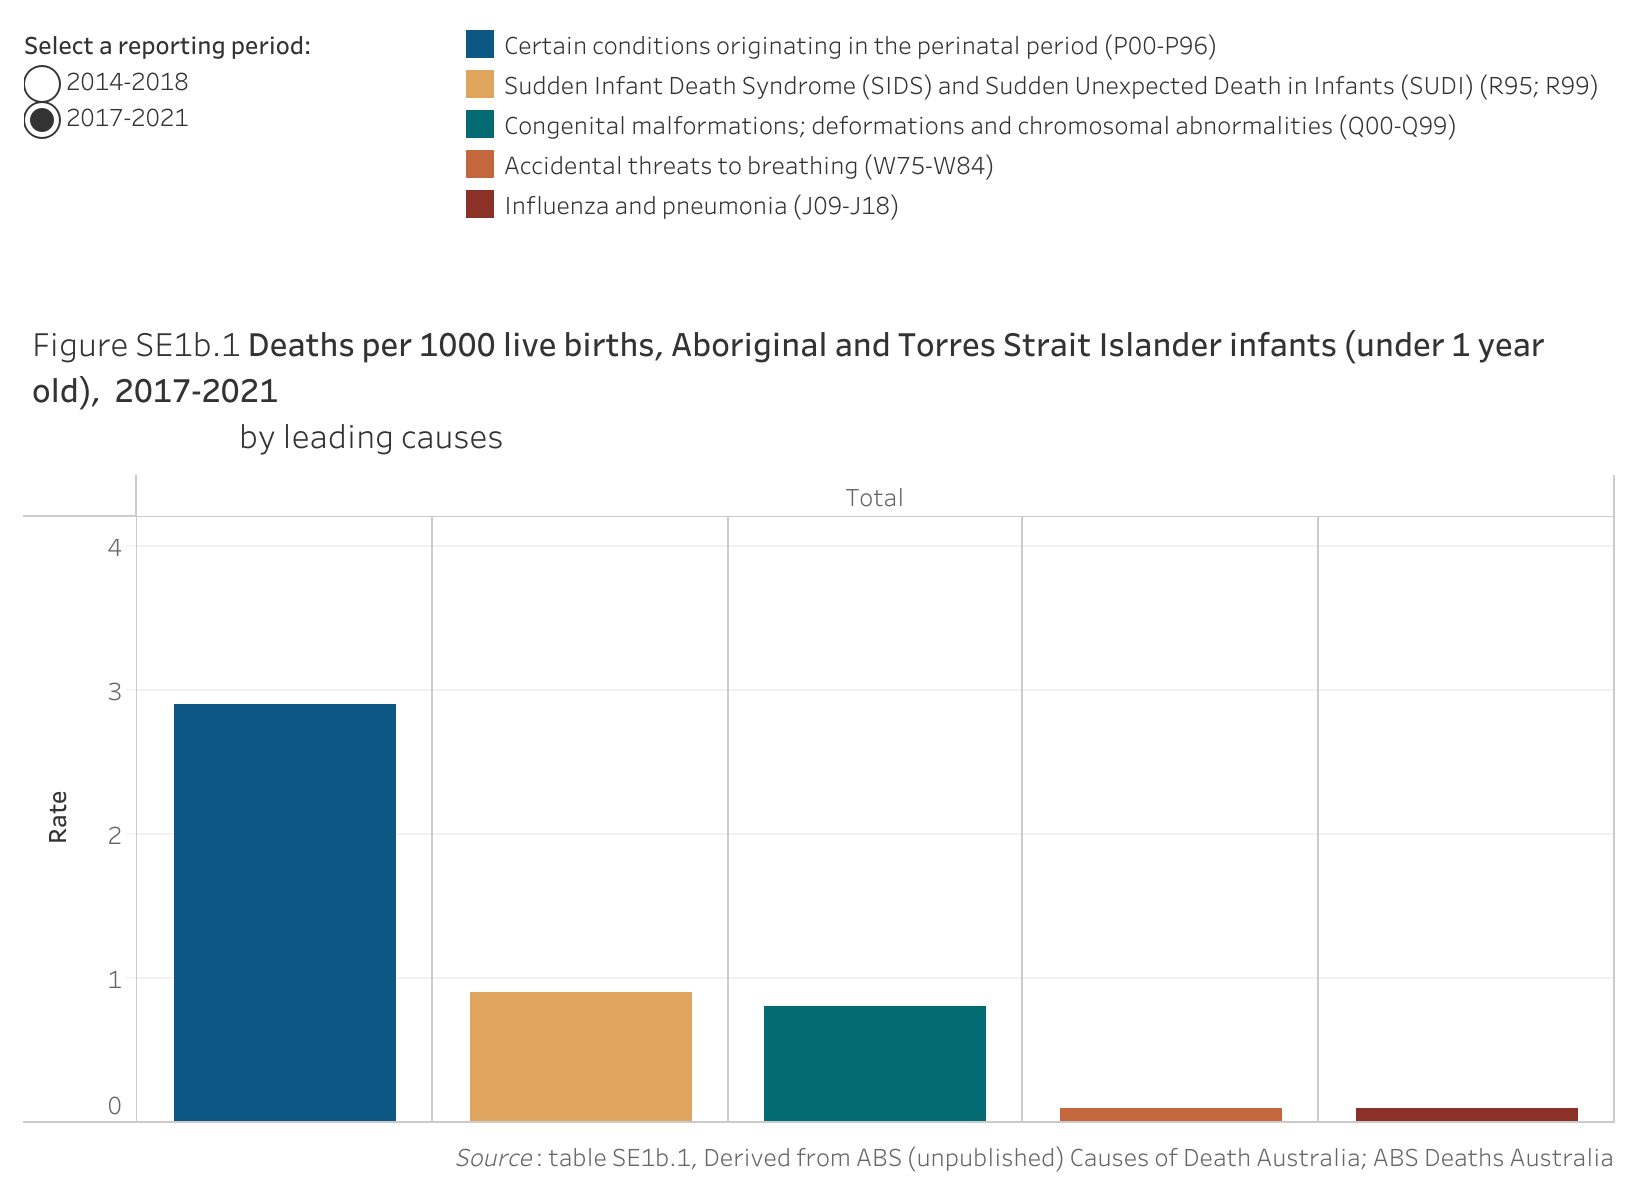 Figure SE1b.1 shows the deaths per 1000 live births, Aboriginal and Torres Strait Islander infants (under 1 year old), 2017-2021, by leading causes. More details can be found within the text near this image.